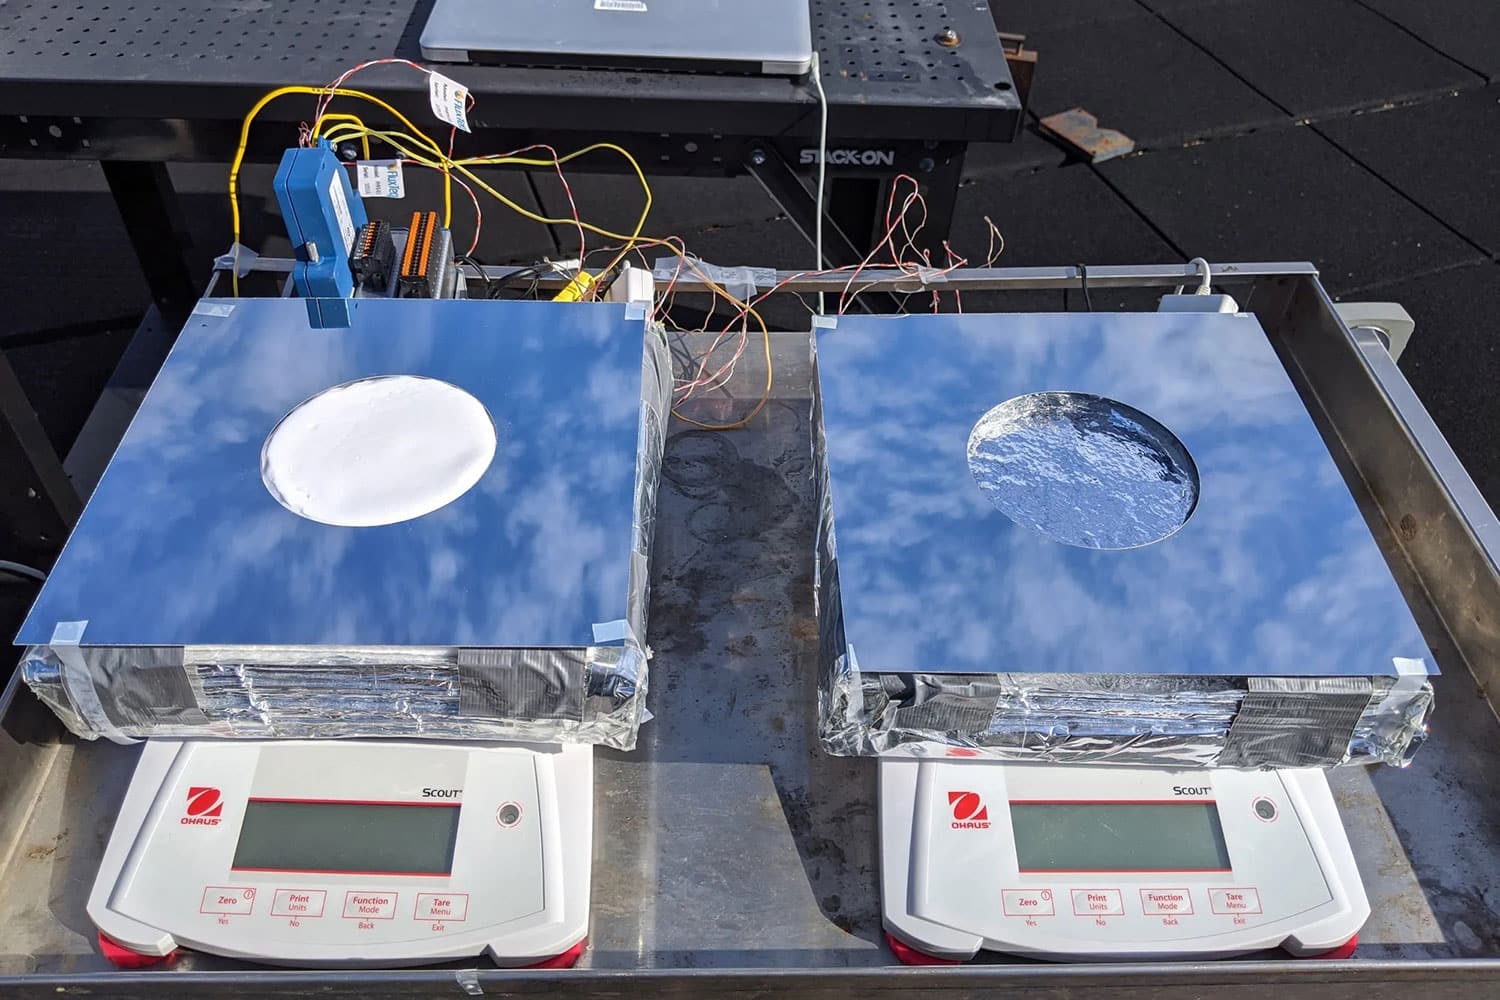 On the left, a sample of the new passive cooling system, combining evaporative cooling, radiative cooling, and insulation. On the right, a device using just evaporative cooling, for comparison testing.